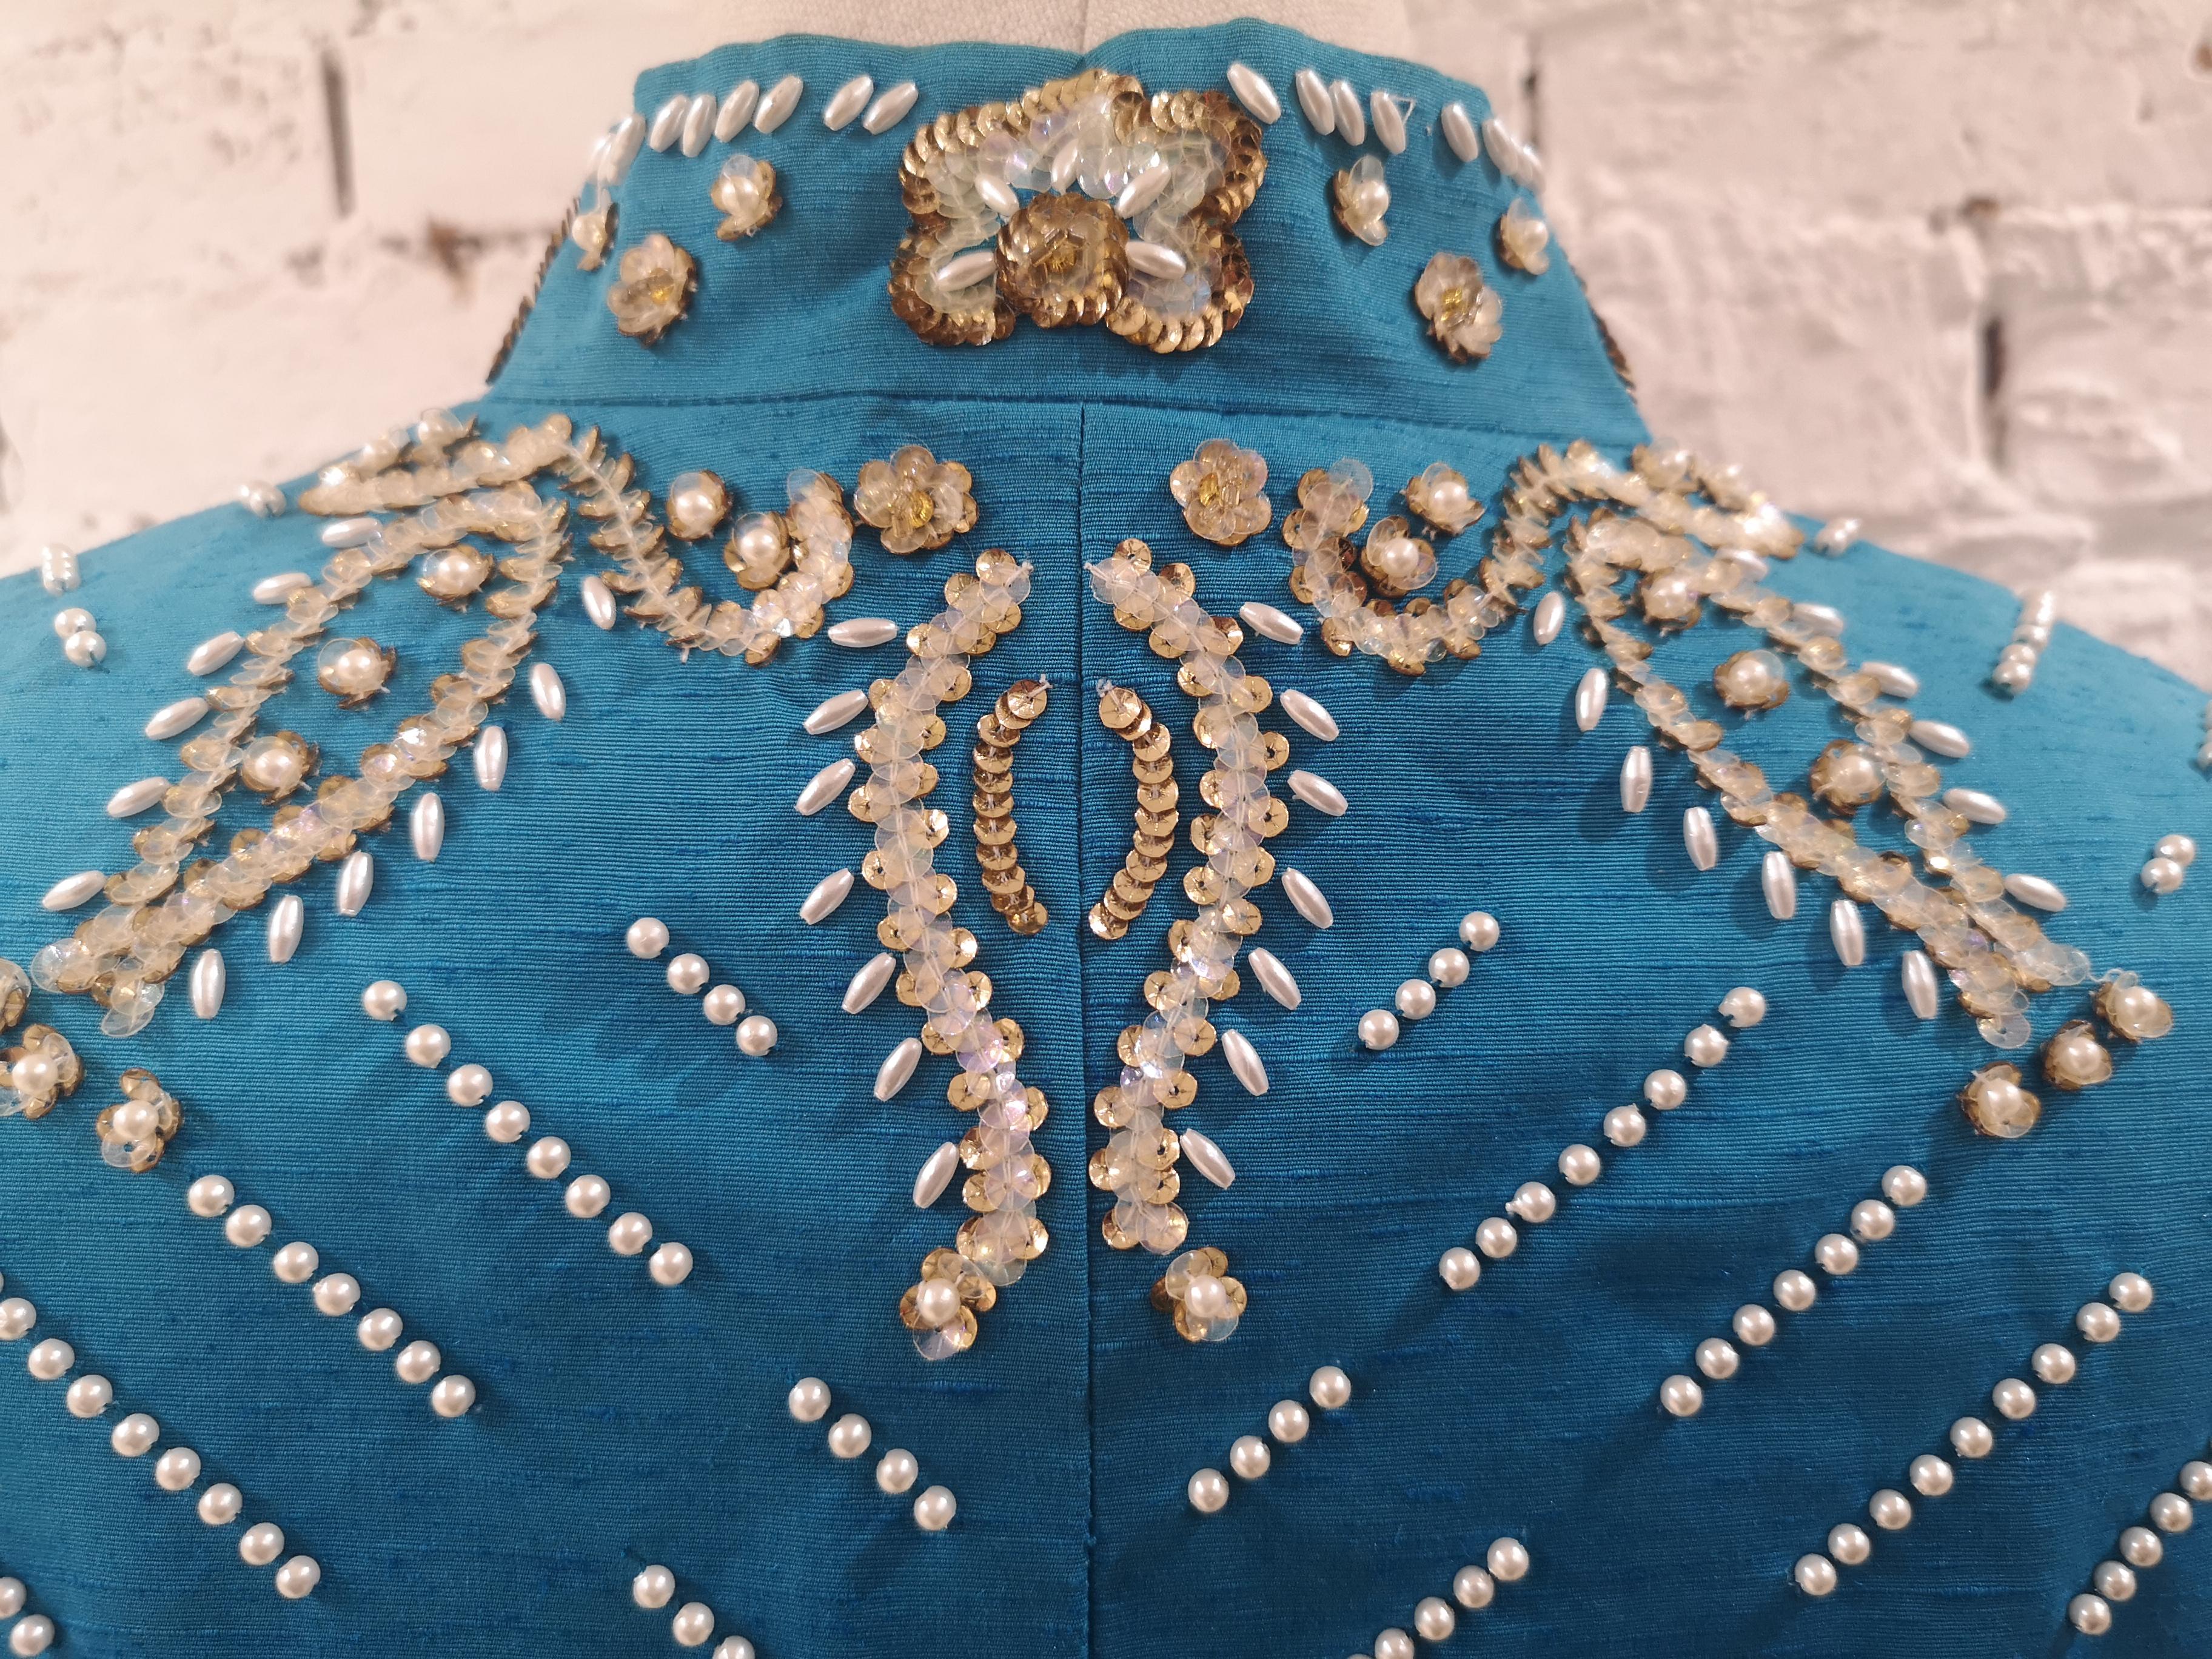 Christian Dior turquoise pearls beads sequins jacket 4